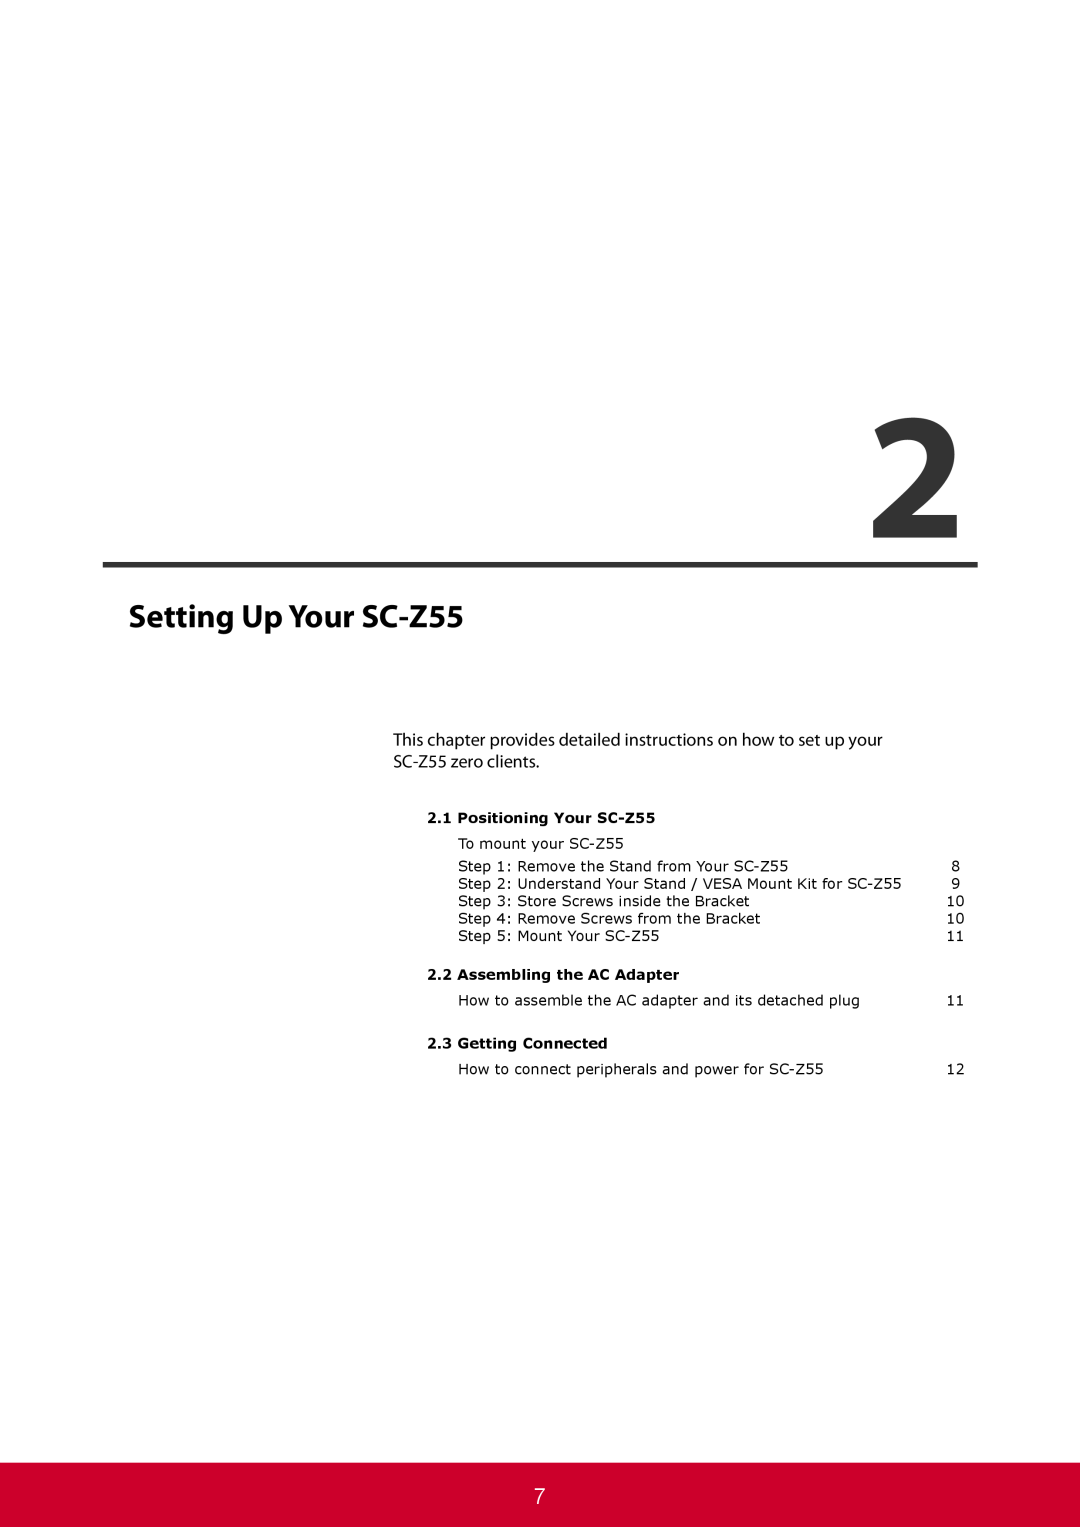 ViewSonic SCZ55BKUS0 manual Setting Up Your SC-Z55, This chapter provides detailed instructions on how to set up your 